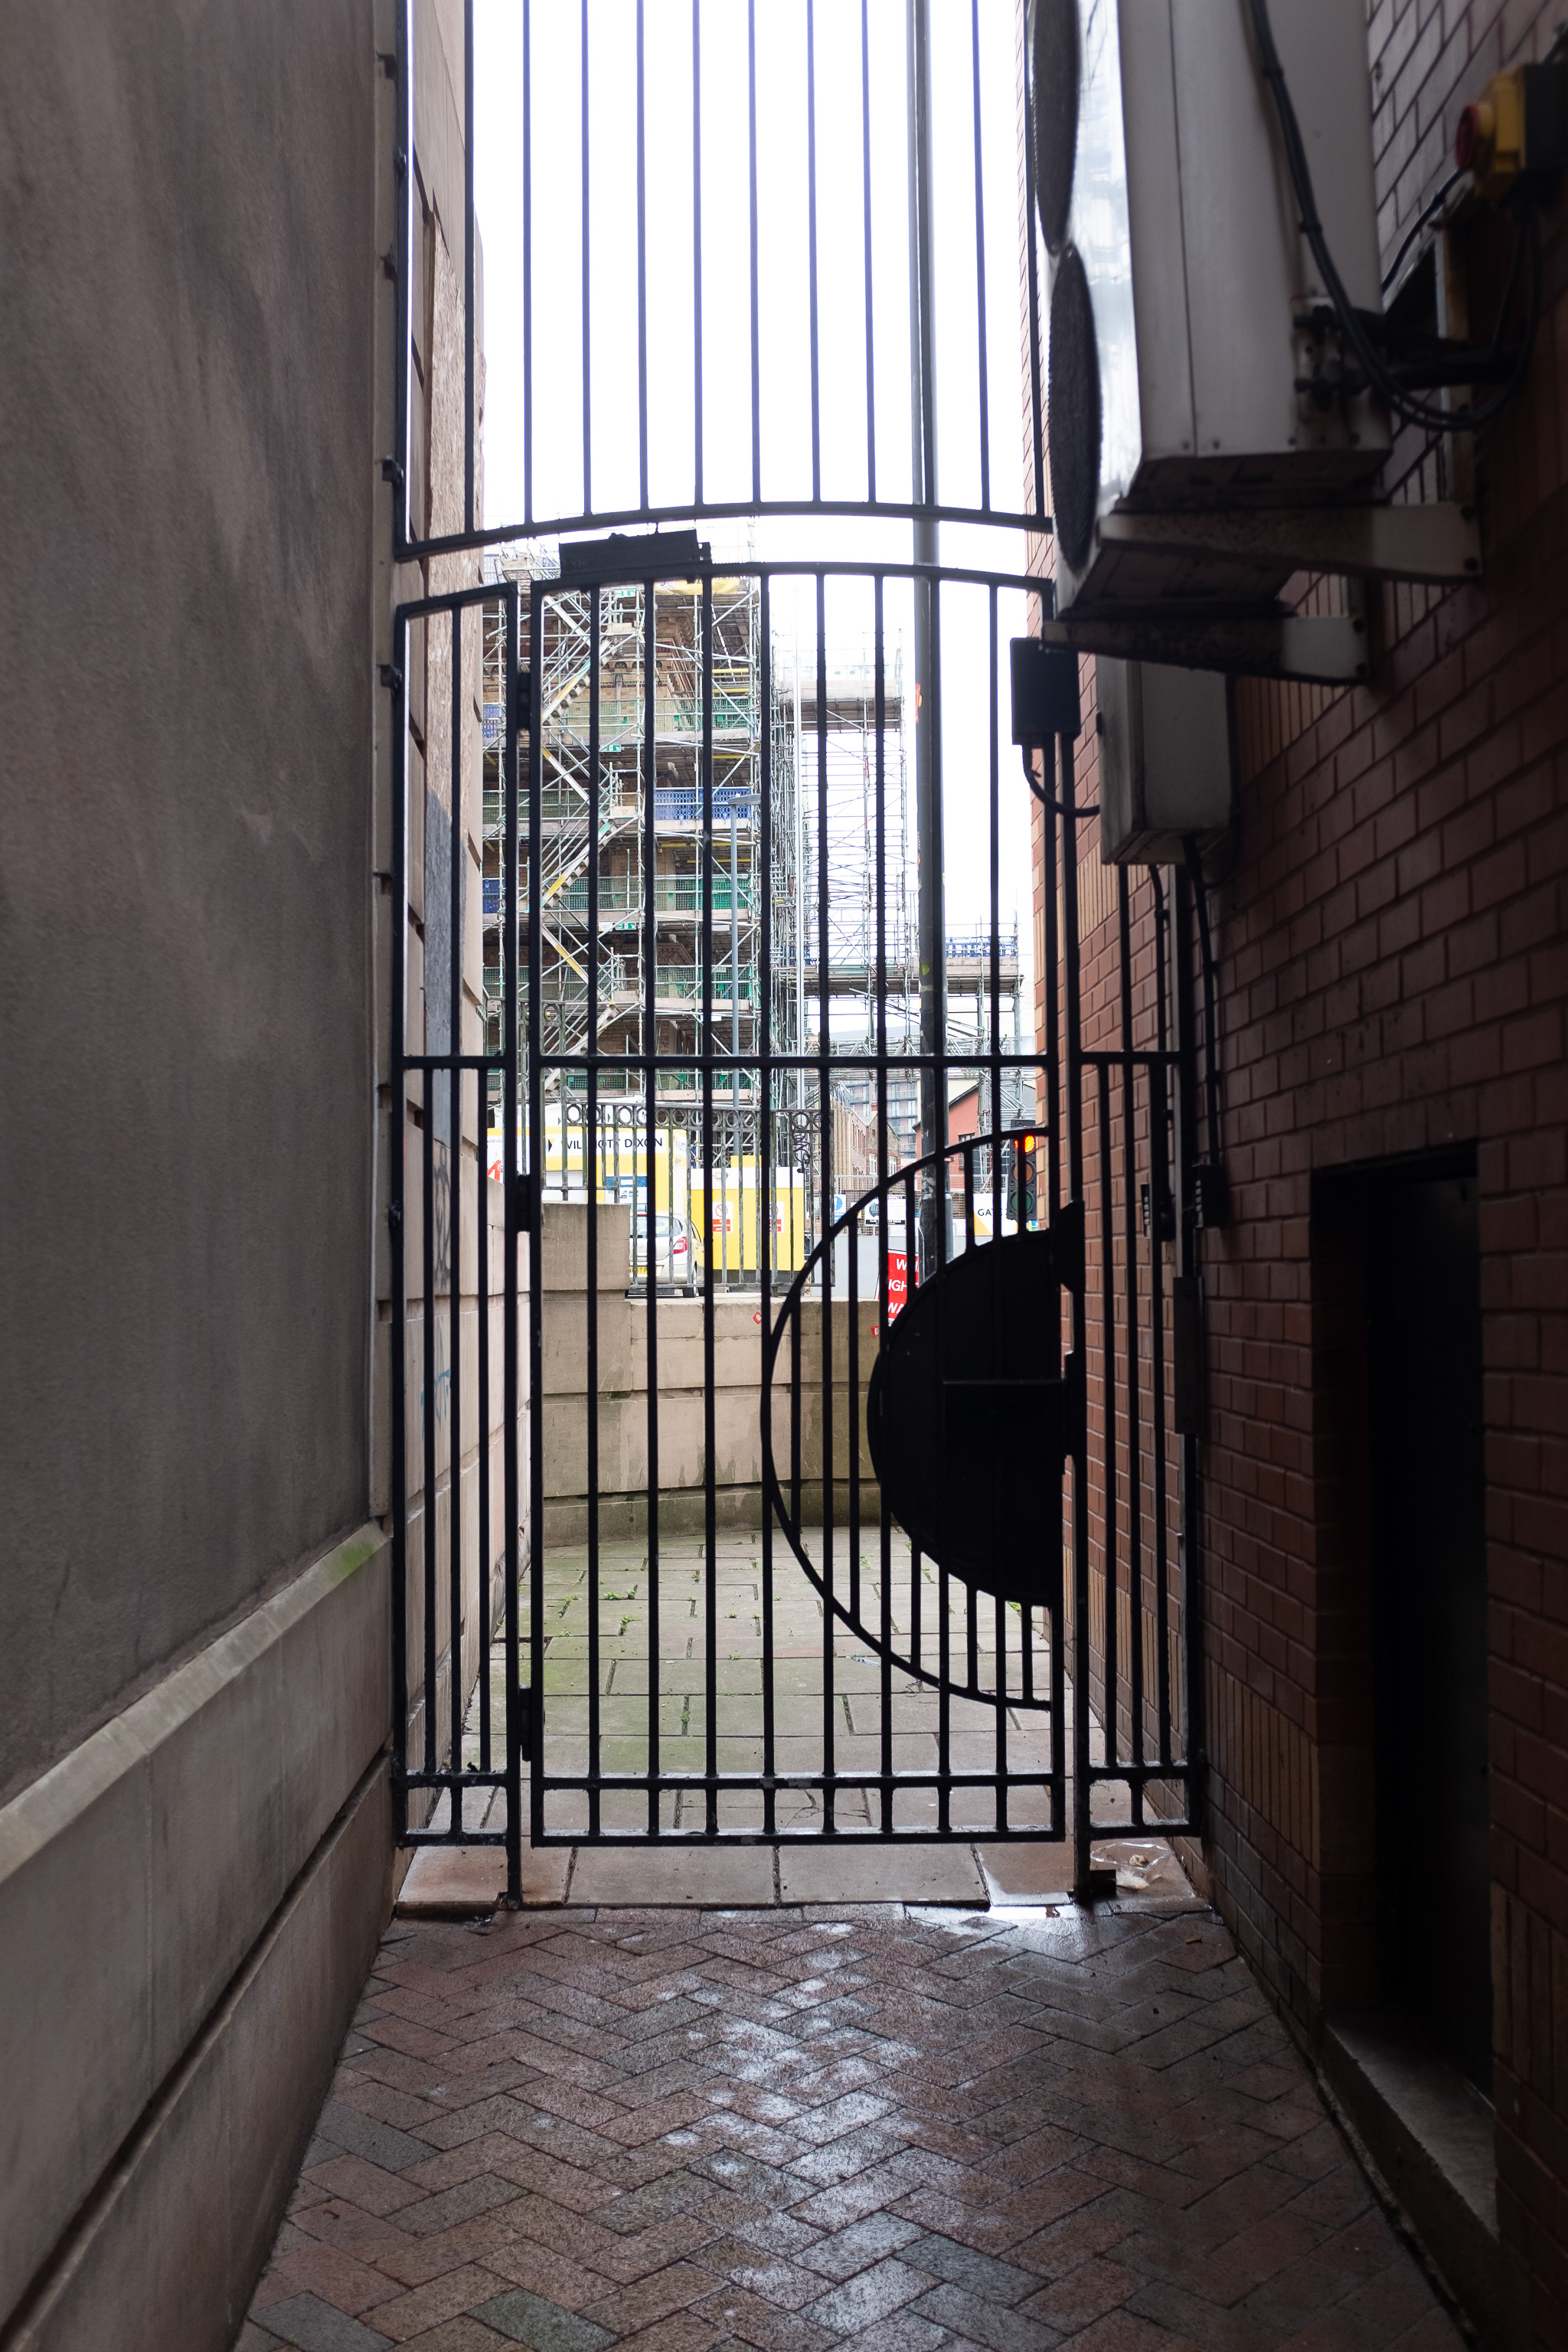 Gated
We're looking out onto the junction of Colston Street and Pipe Lane, between Amelia Court and an eaterie called Moroccan Corner.

We're a little bi...